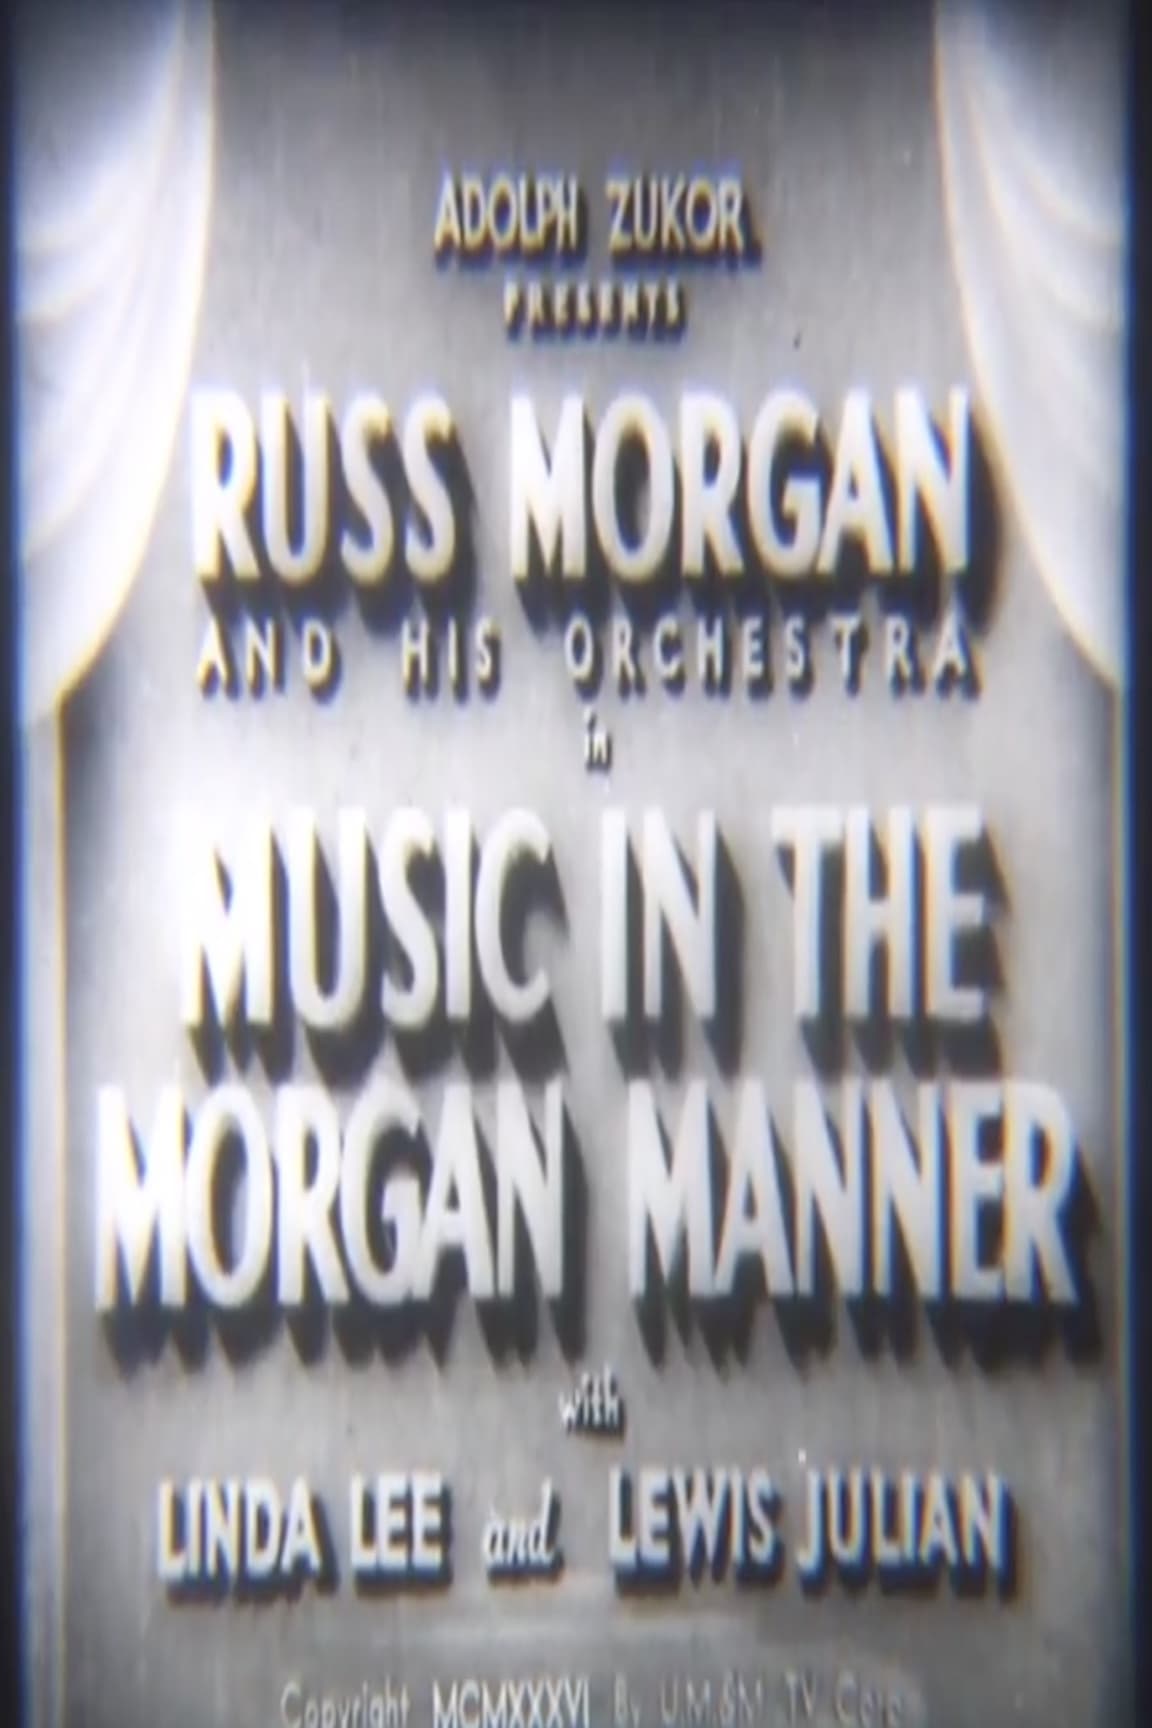 Music In The Morgan Manner